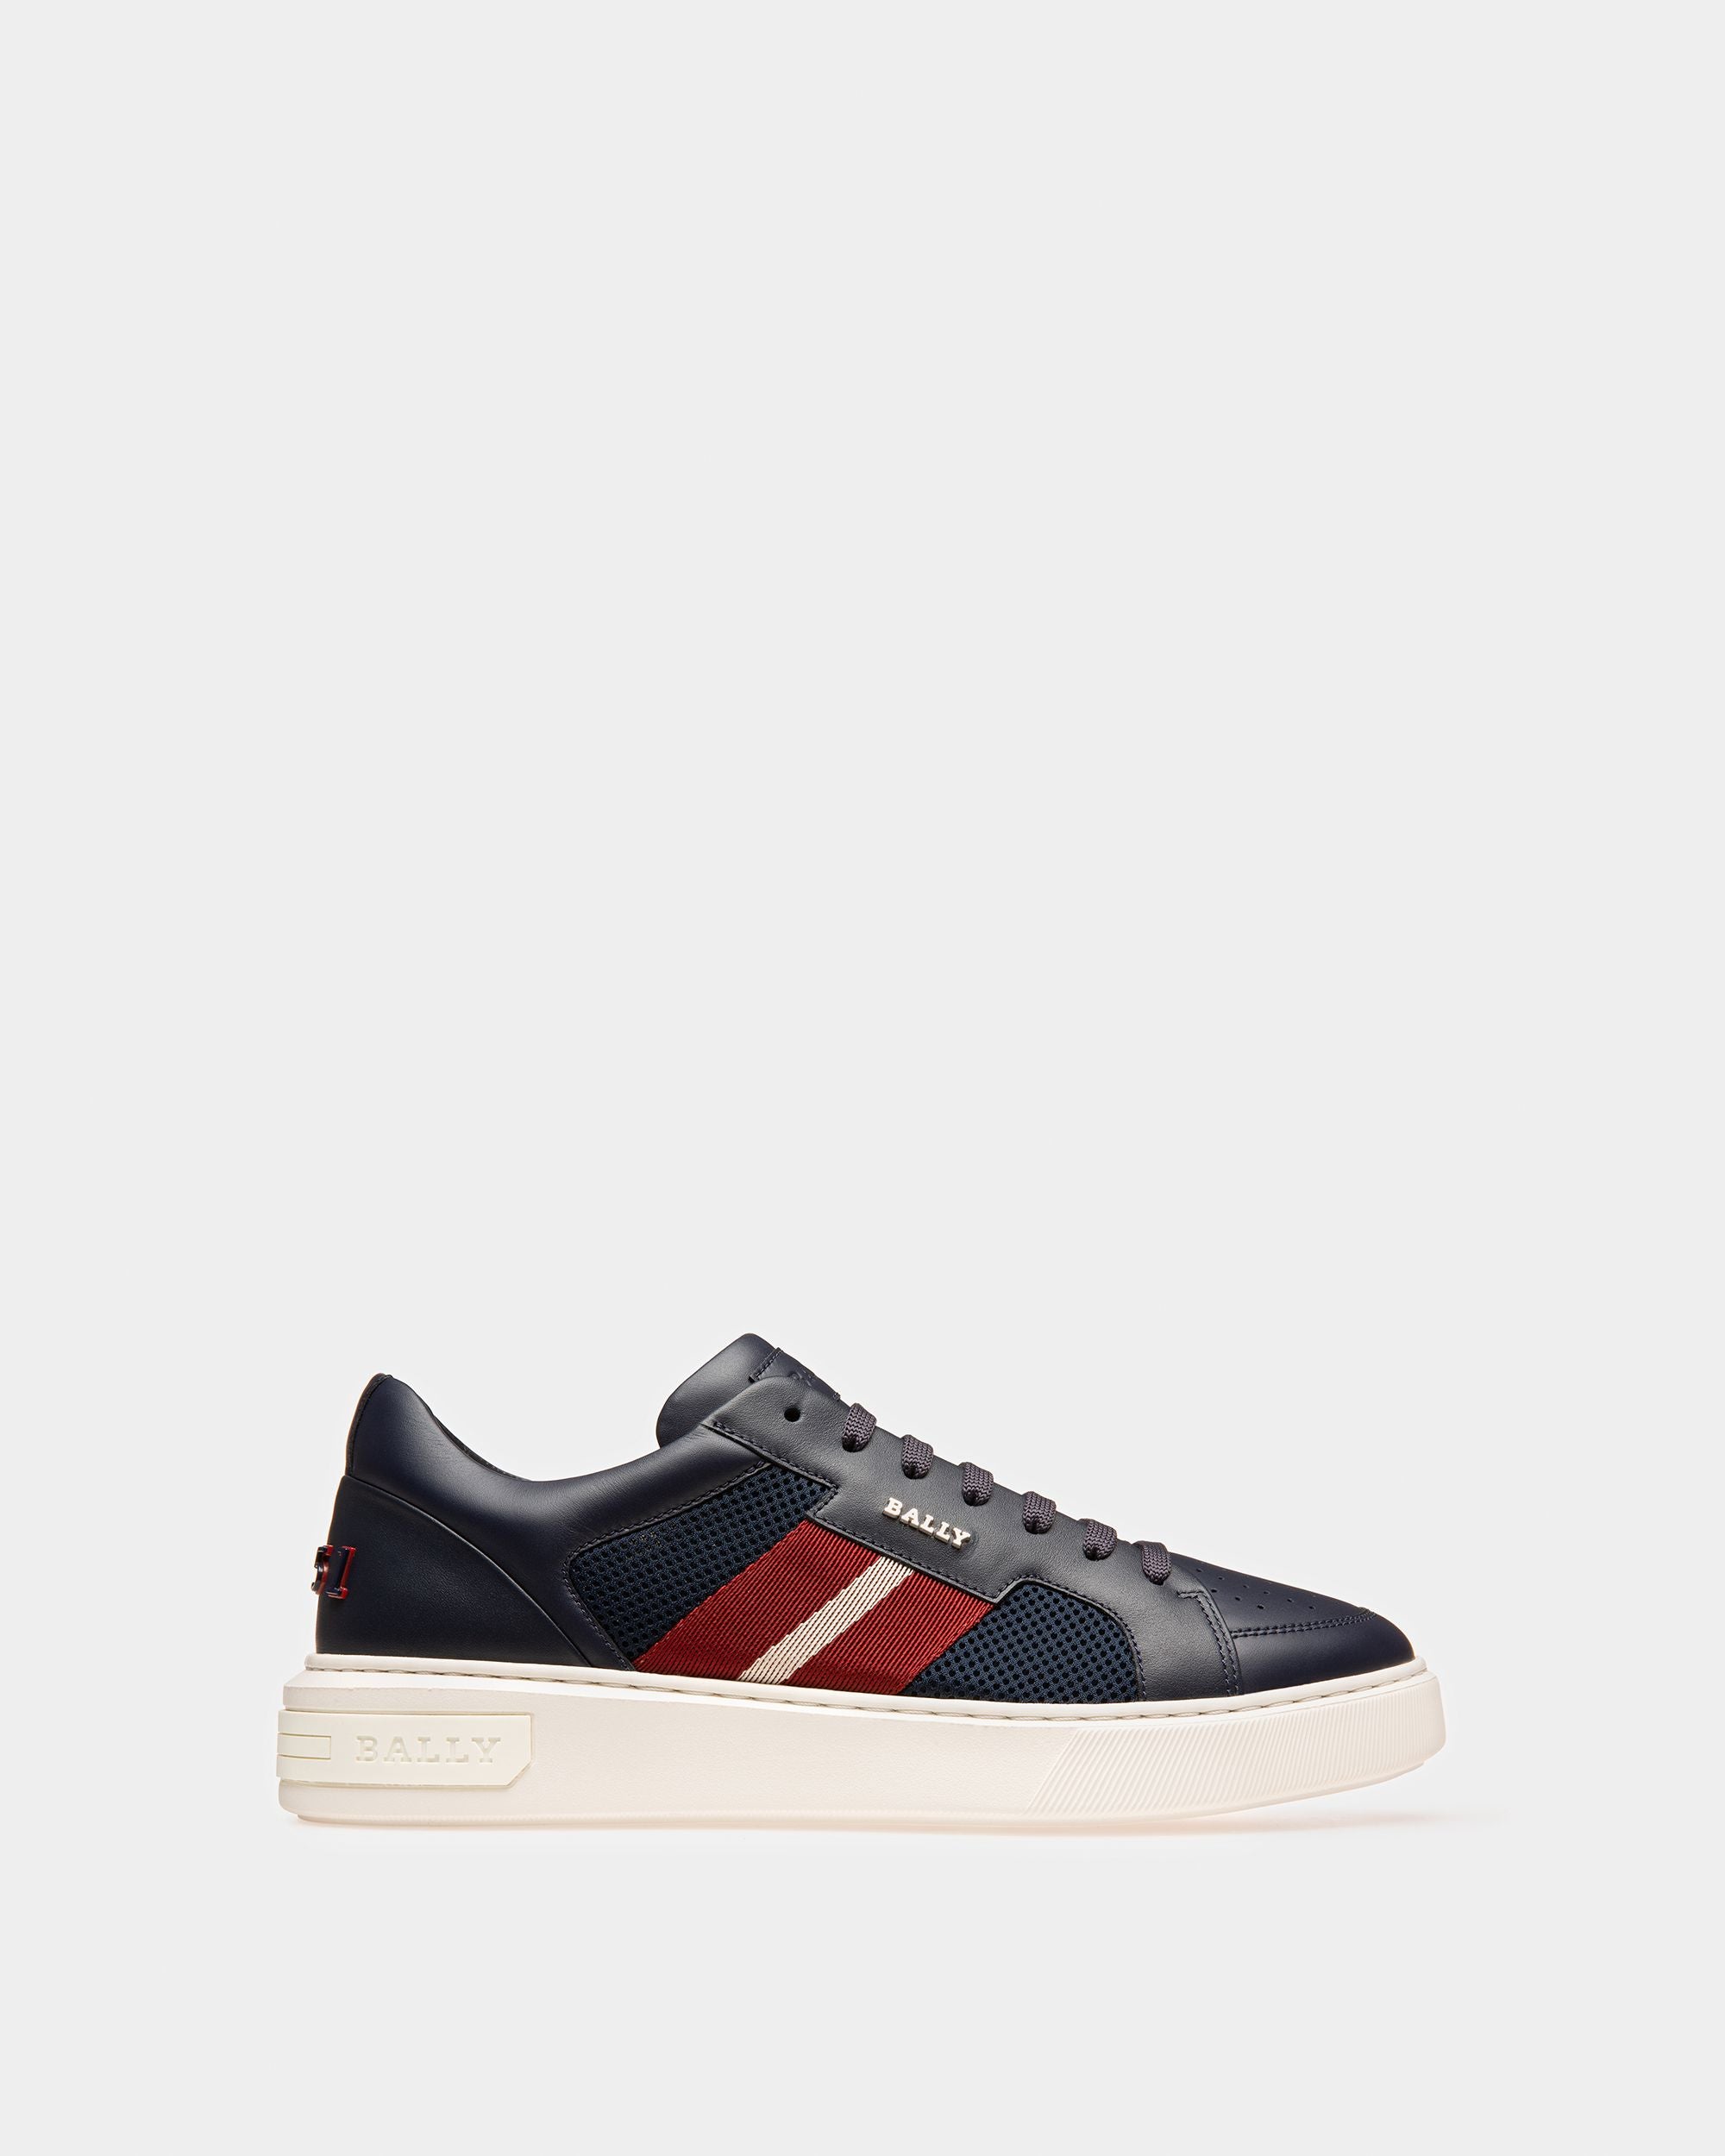 Men's dress sneakers, slip-ons, high and low top | Bally Lift